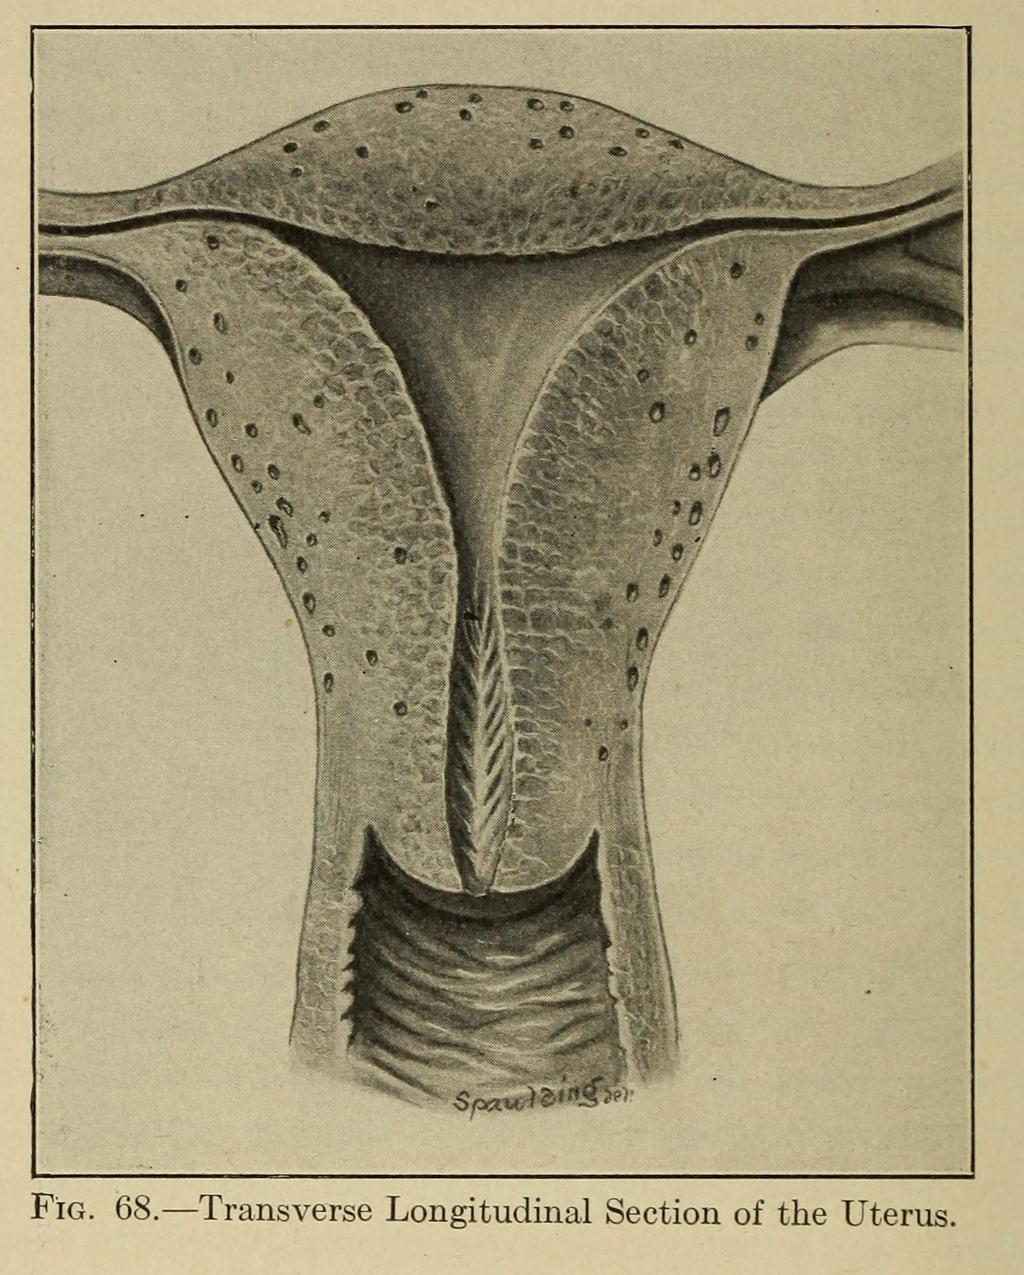 Burrage, Walter L. Gynecological Diagnosis. New York, London, D. Appleton and Company, 1910. informed consent